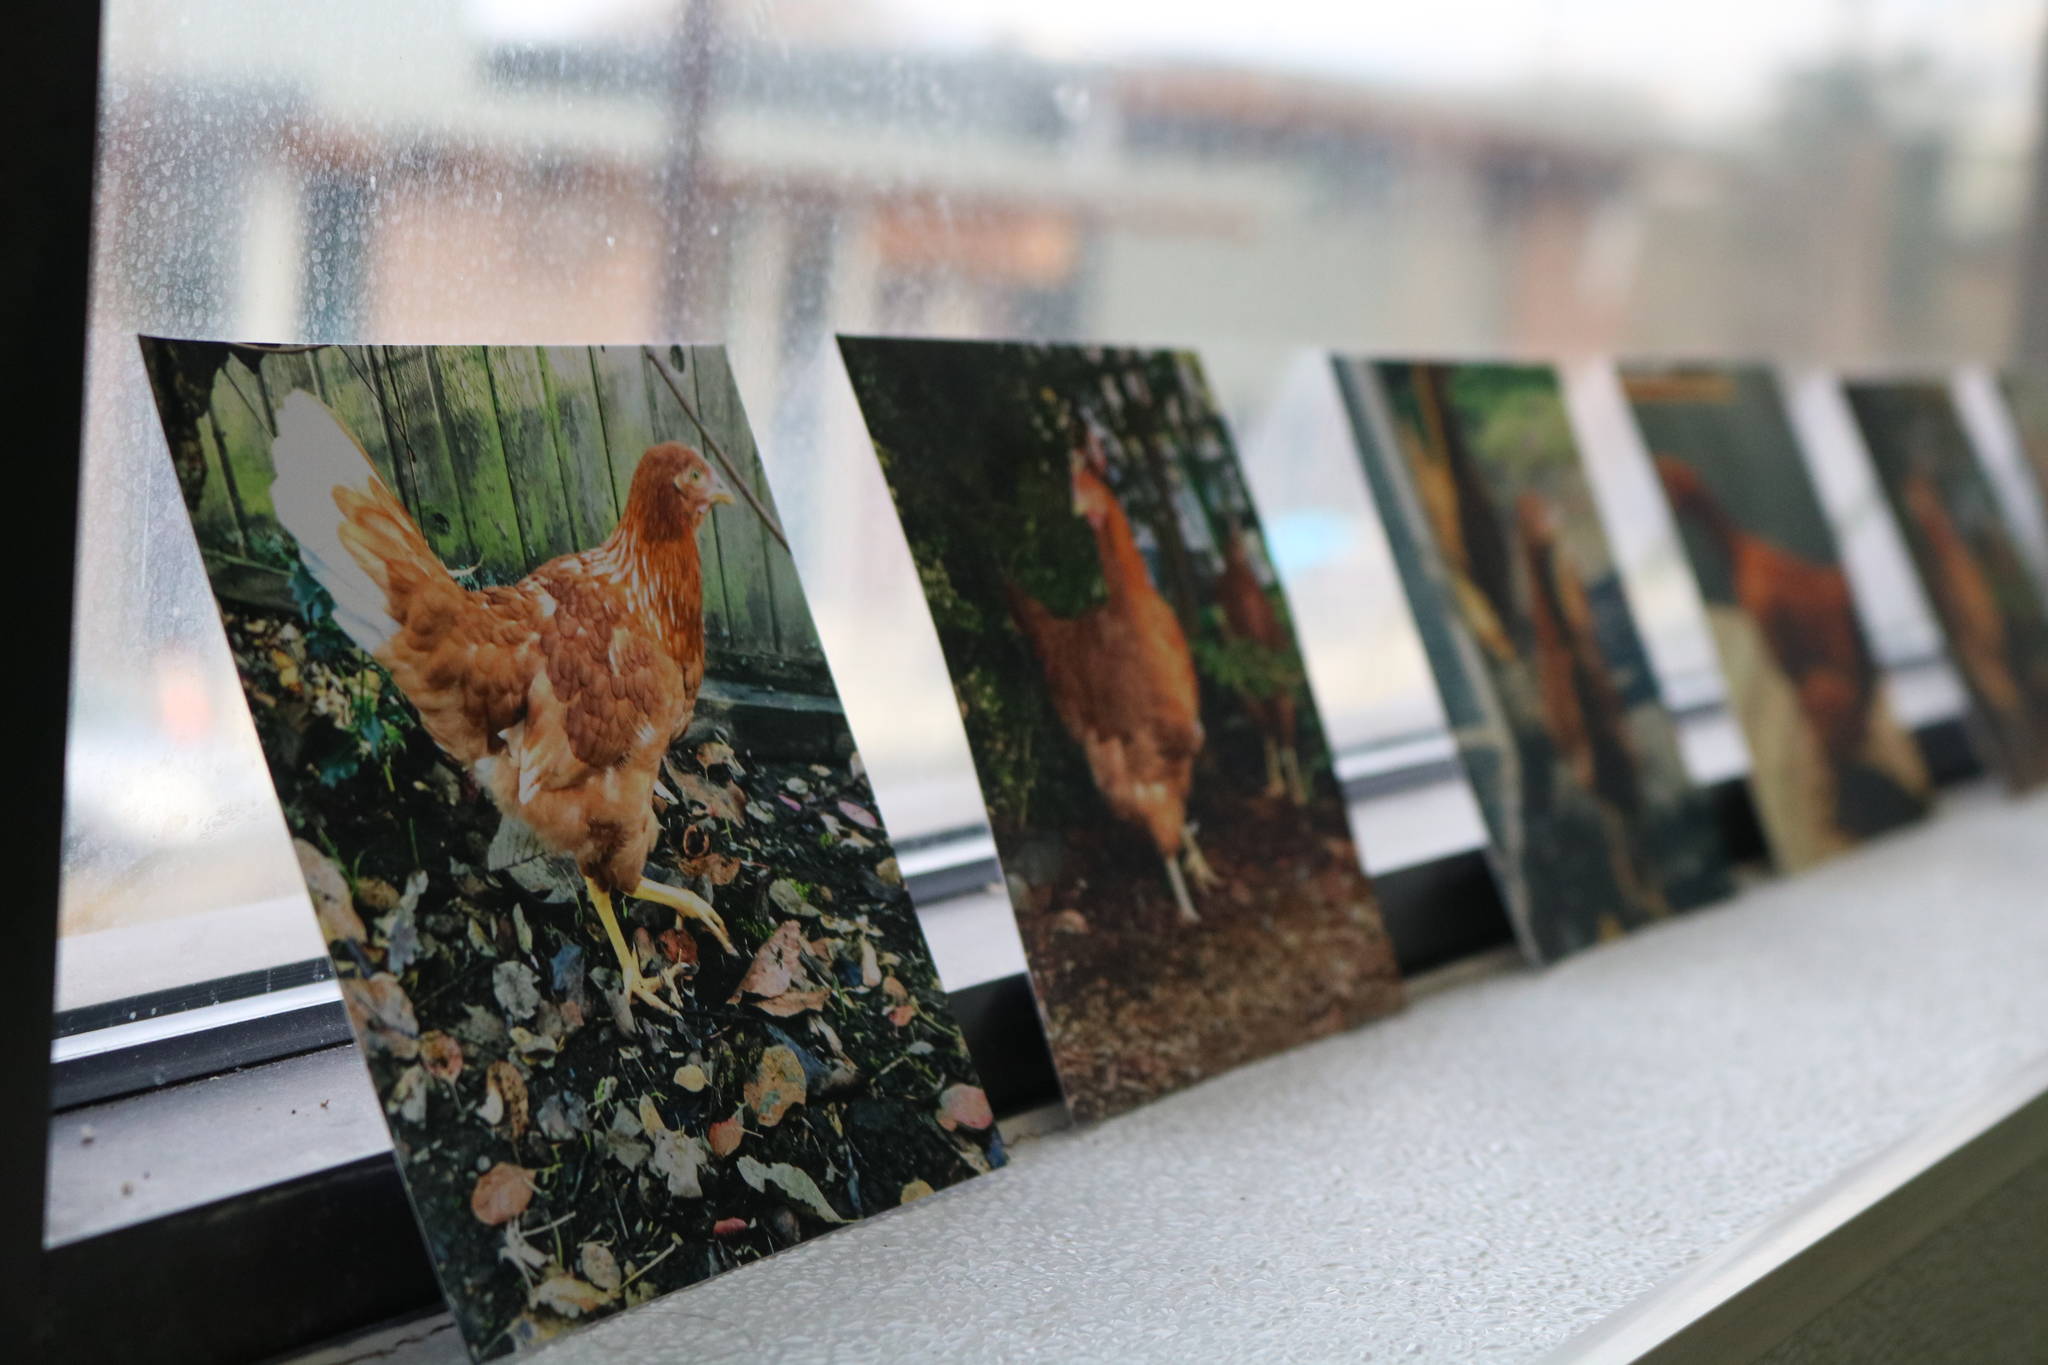 Pictures of chickens are displayed in the break room at Rebellyous. Aaron Kunkler/staff photo